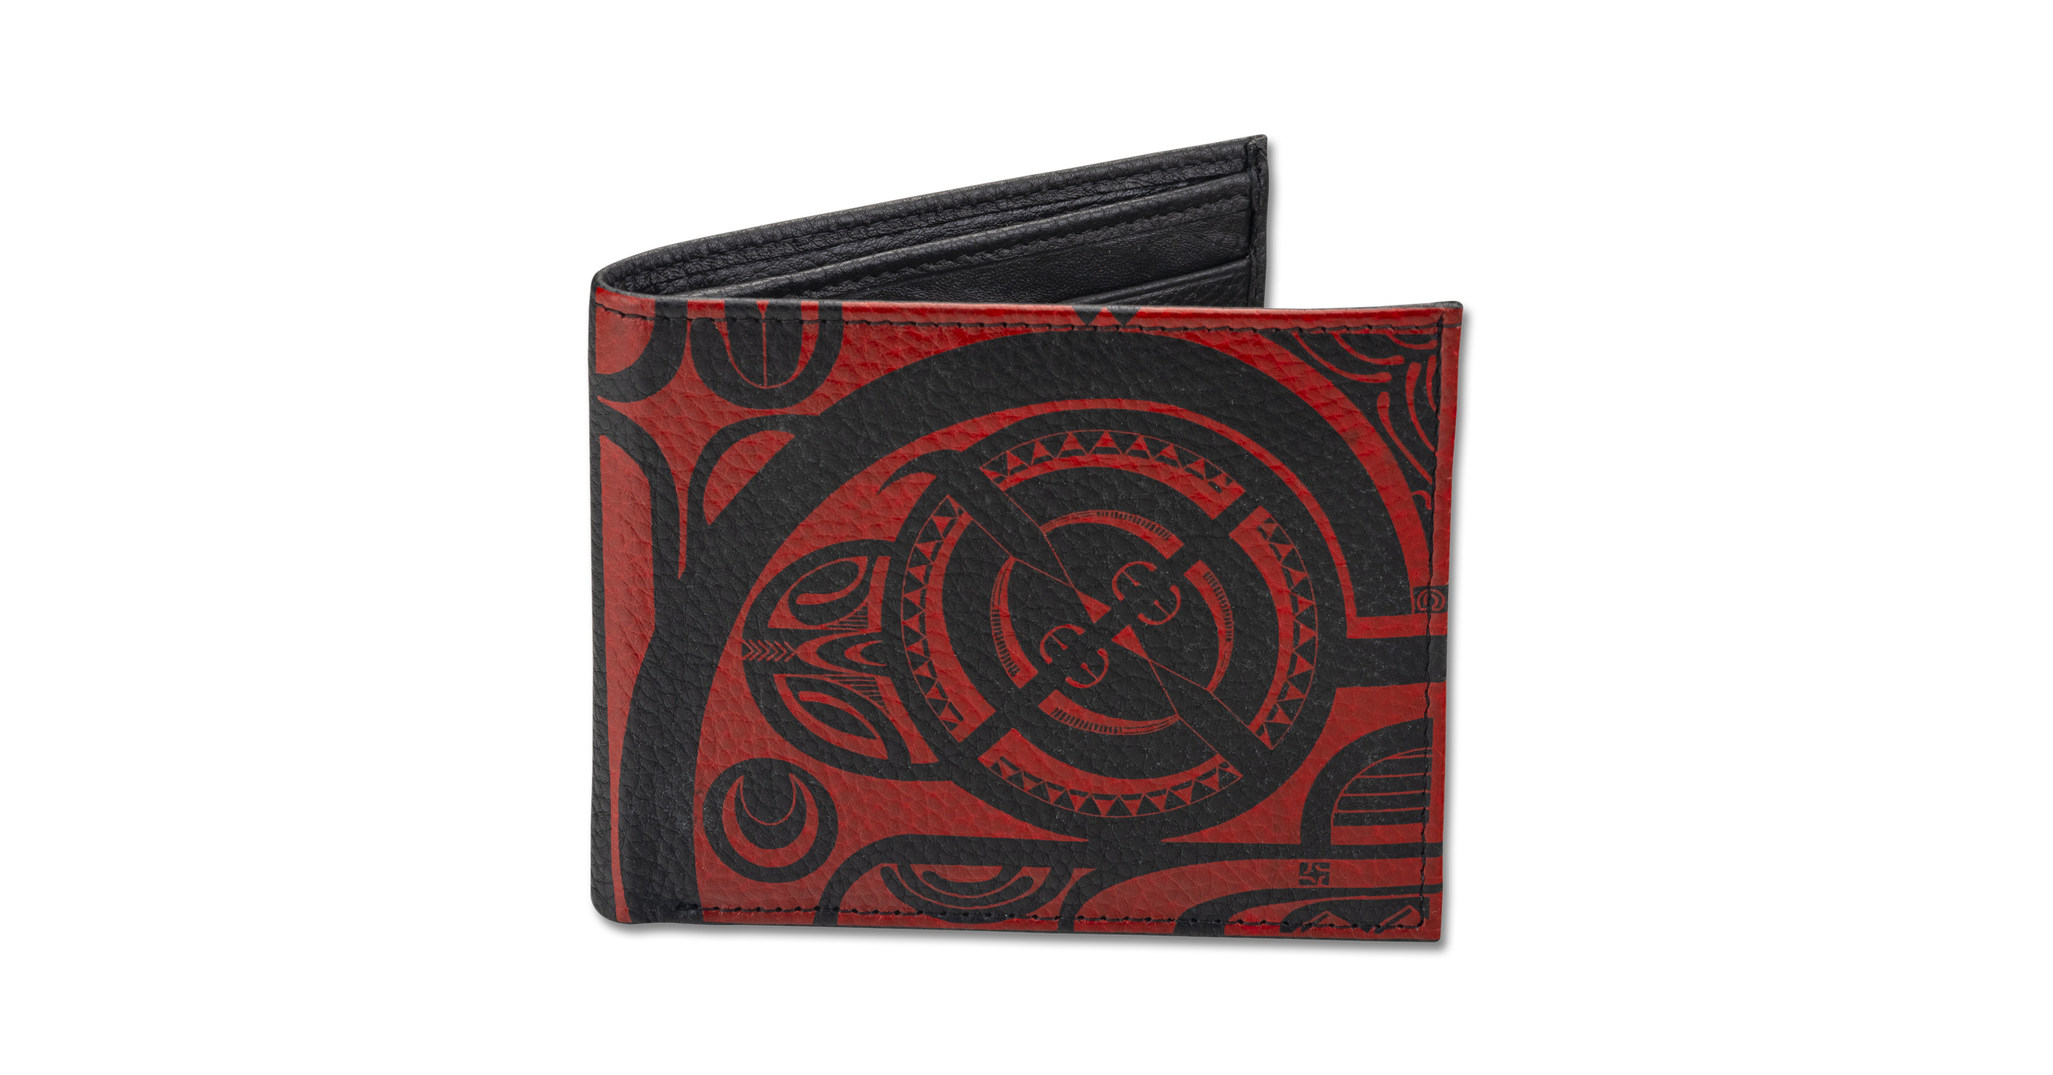 Kiva Store  Bird Motif Hand-Painted Leather Wallet from Costa Rica - Song  of Birds